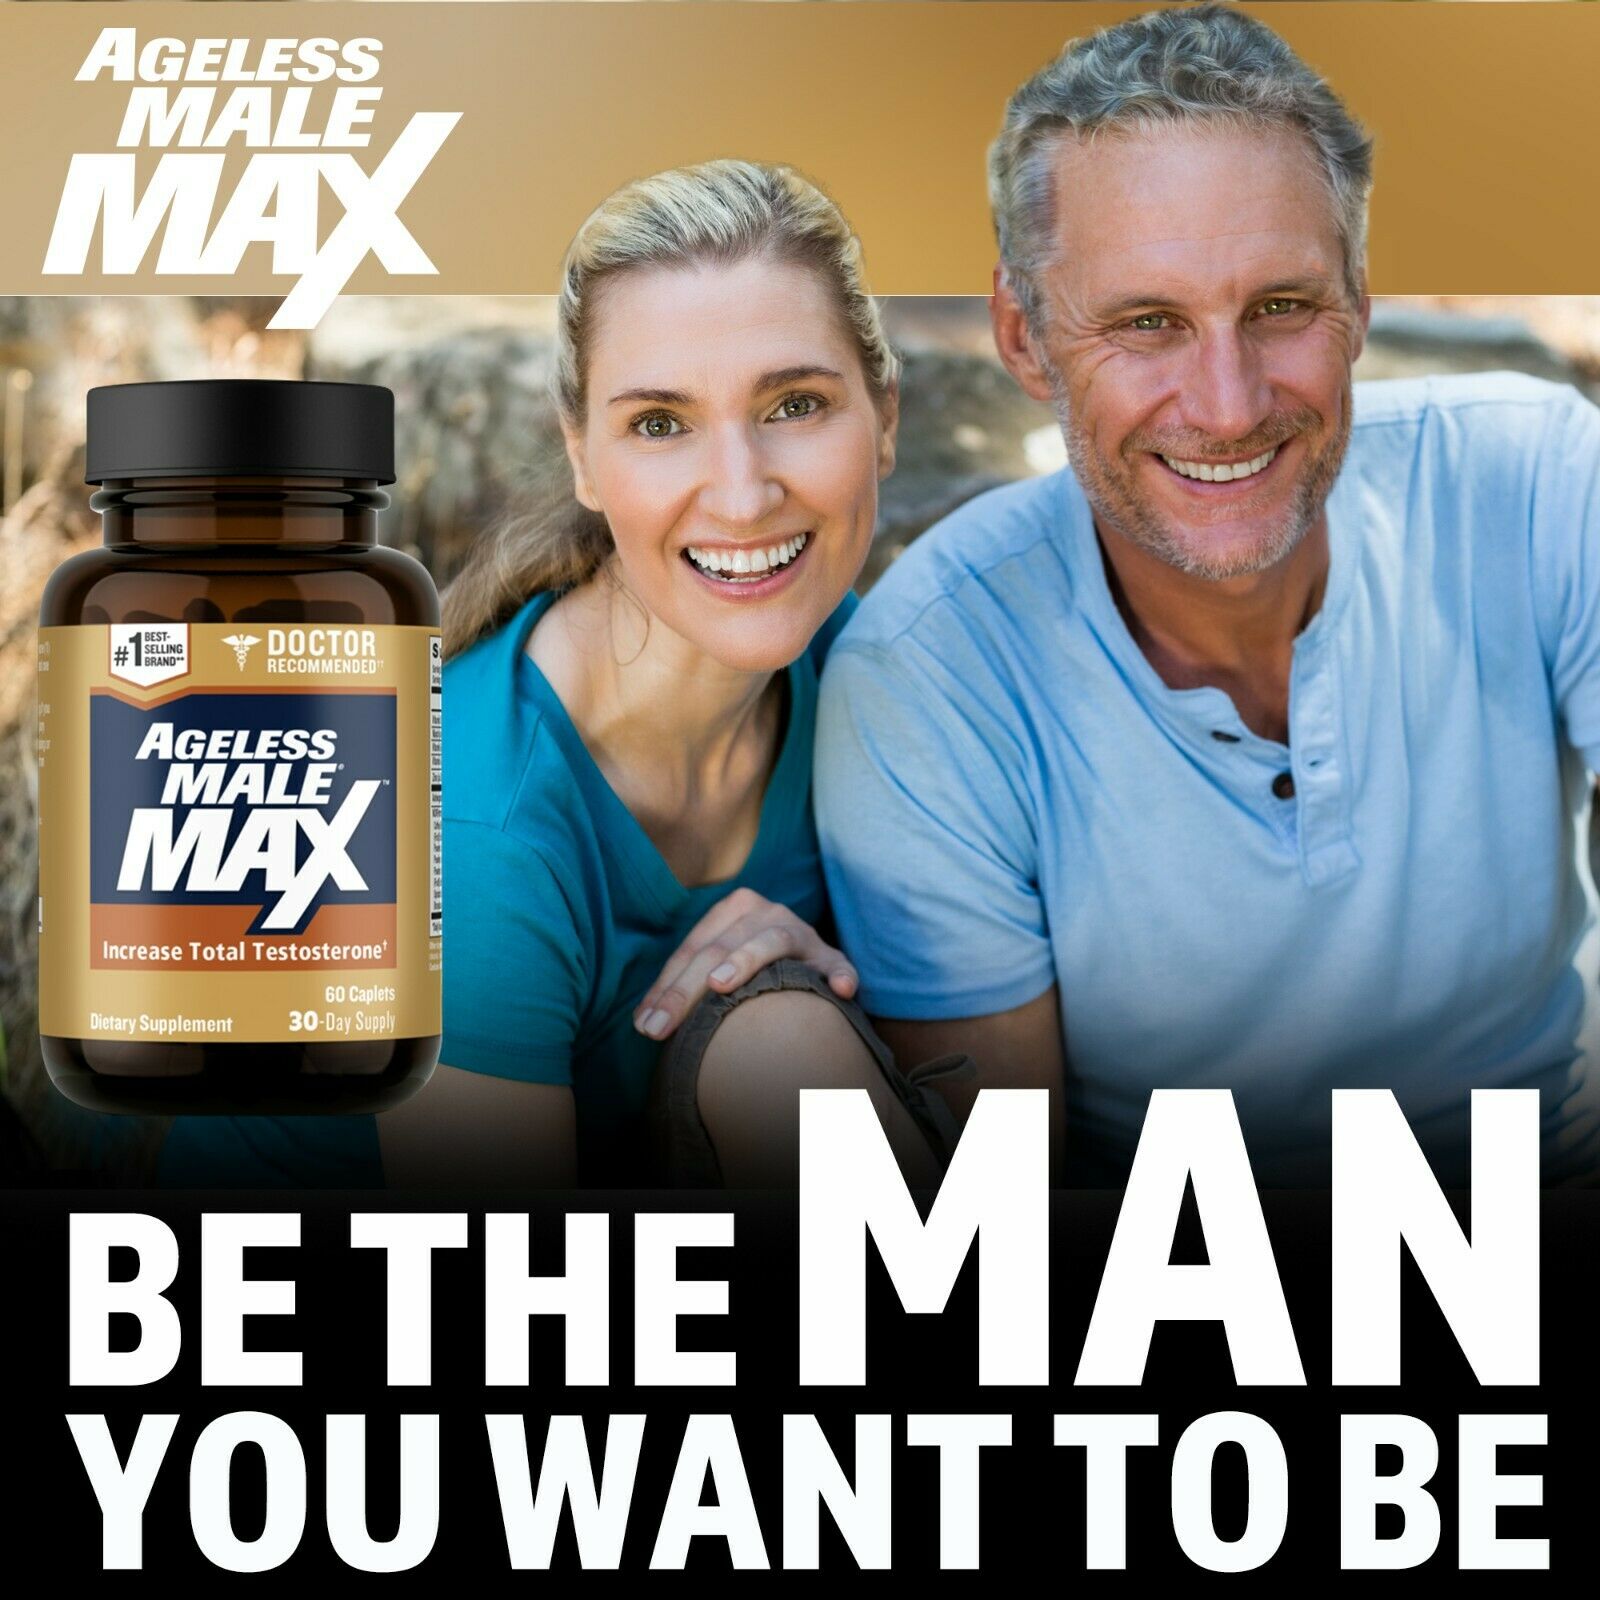 Ageless Male Max Testosterone Booster by New Vitality - 60 Caplets FREE Shipping